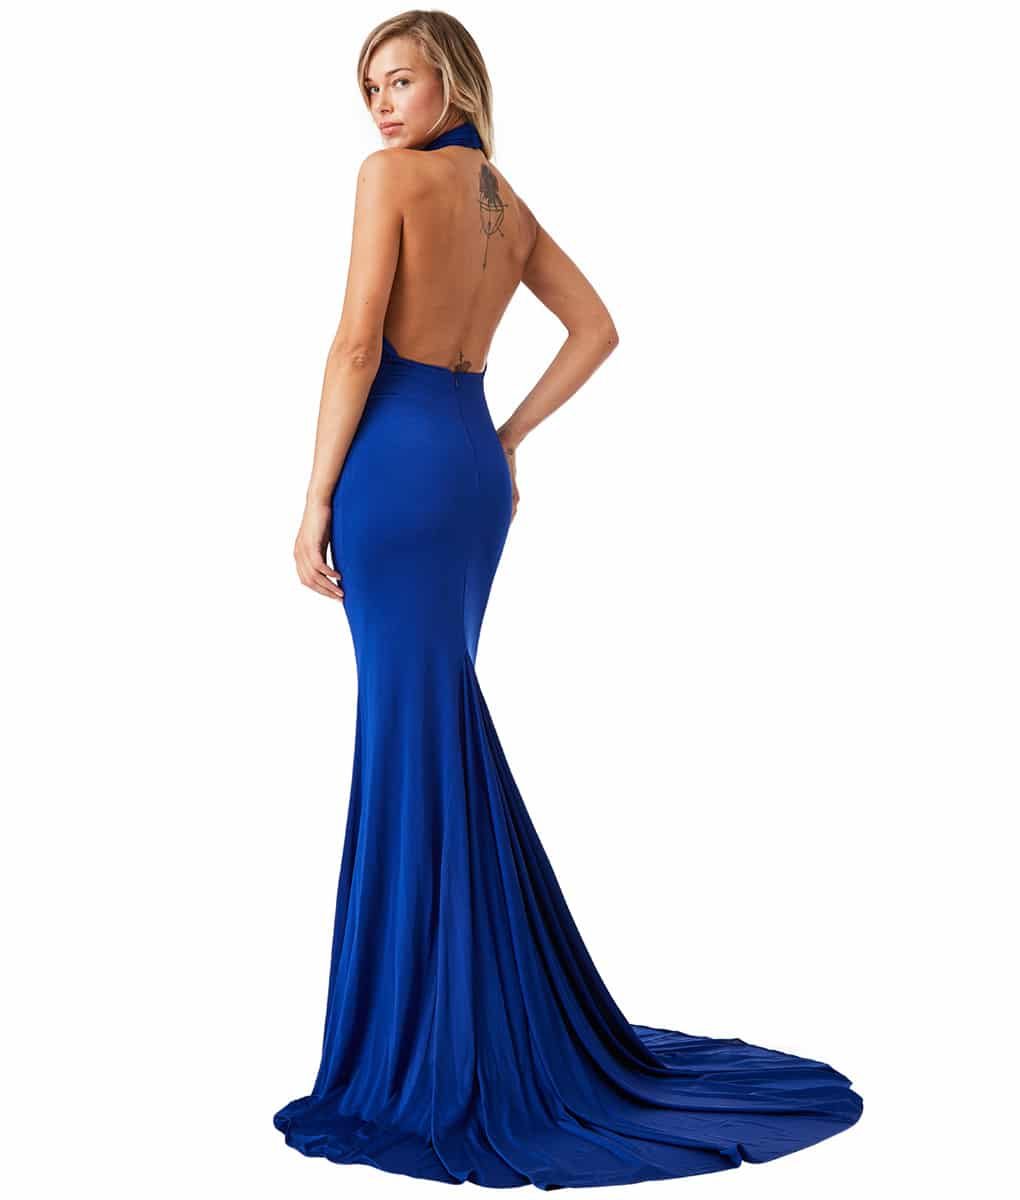 Alila Blue Backless Gown